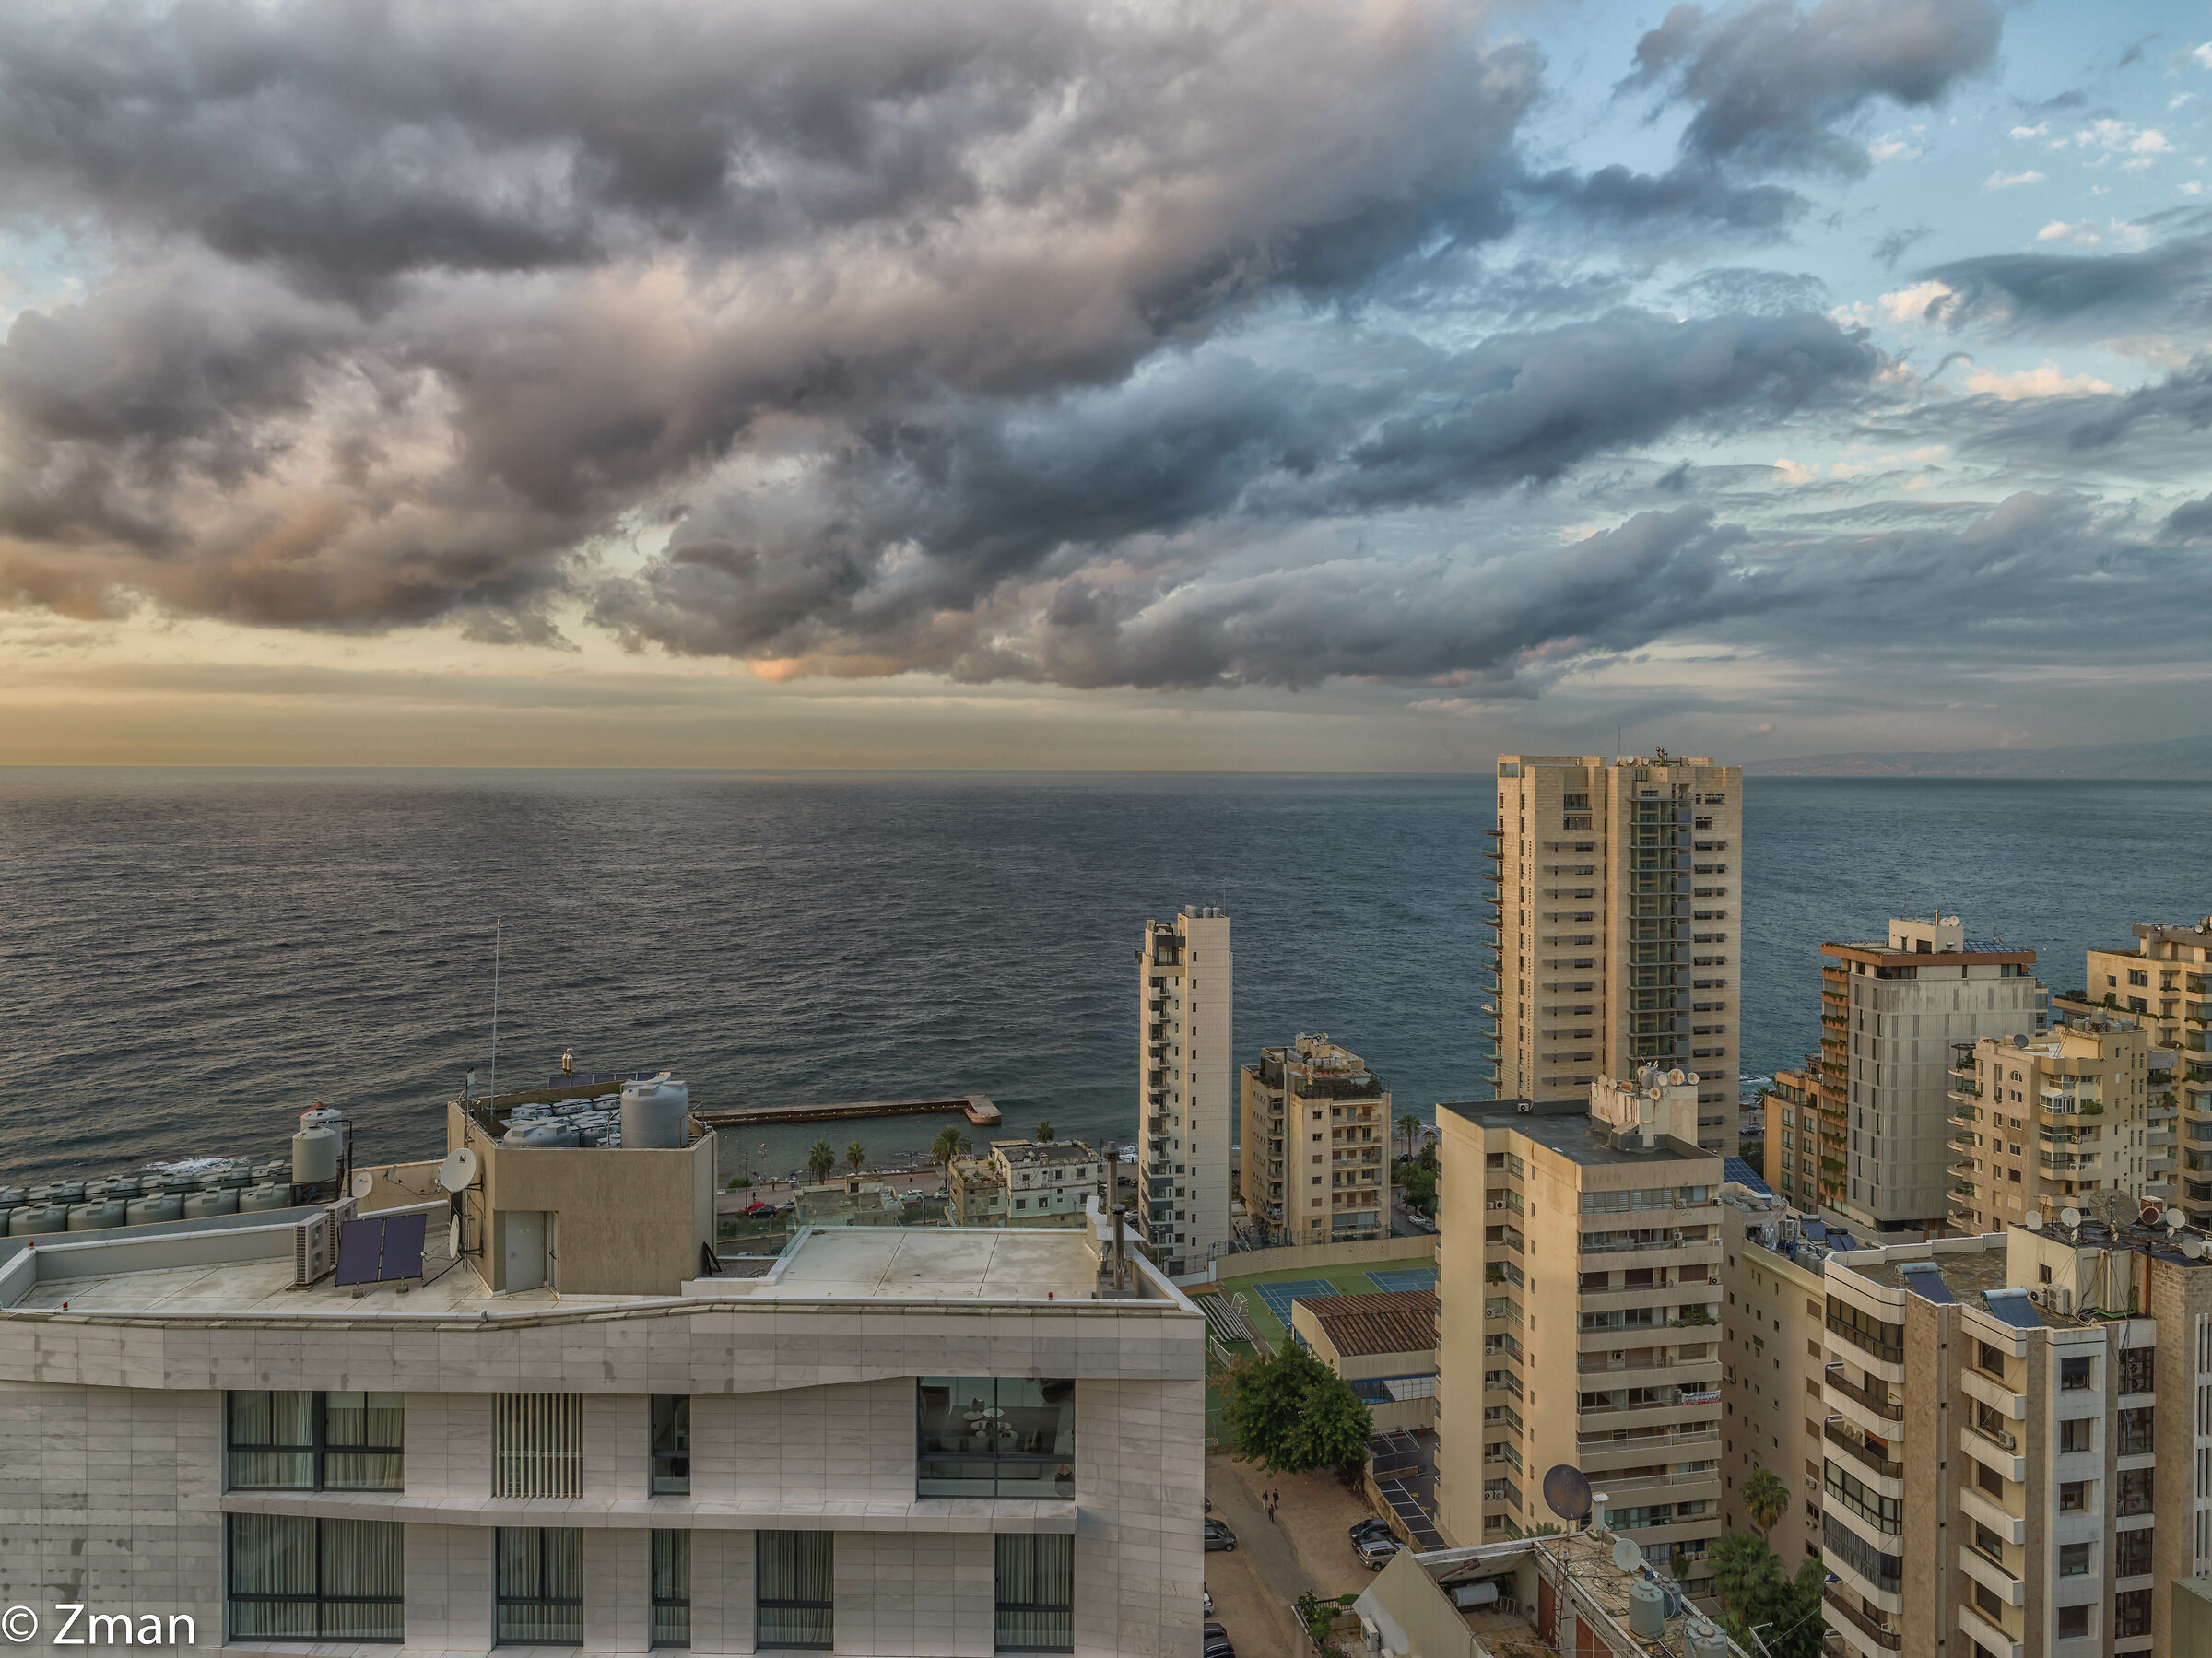 Beirut Our City...